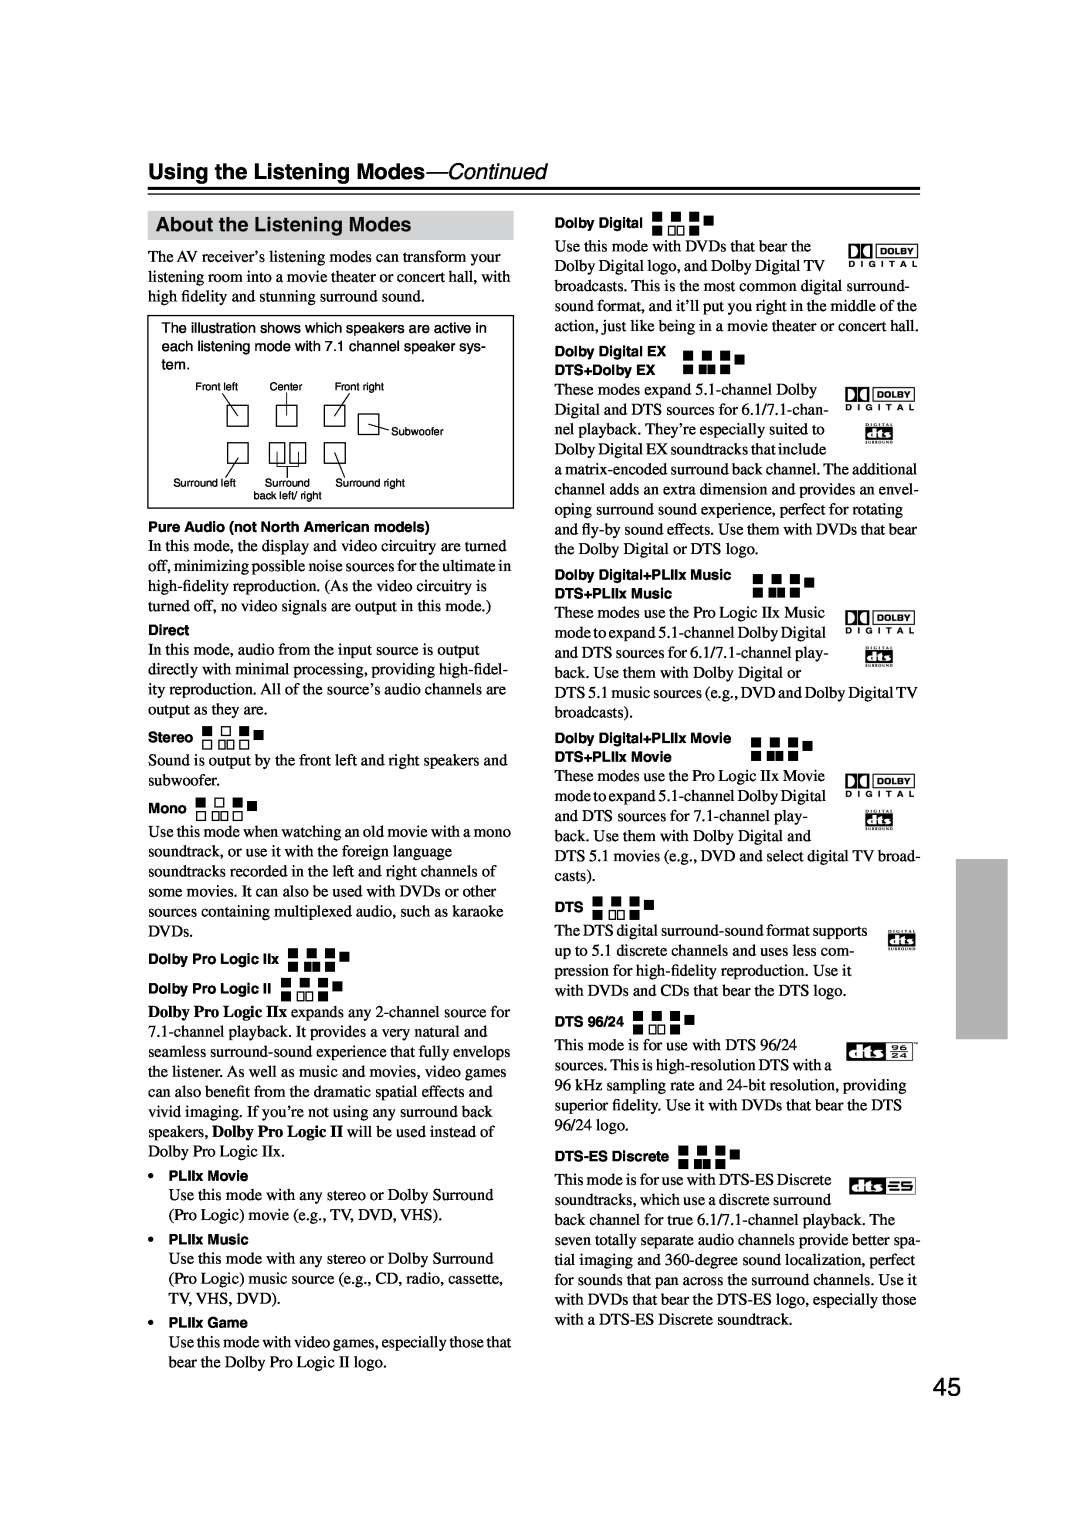 Onkyo TX-SR574 instruction manual About the Listening Modes, Using the Listening Modes-Continued 